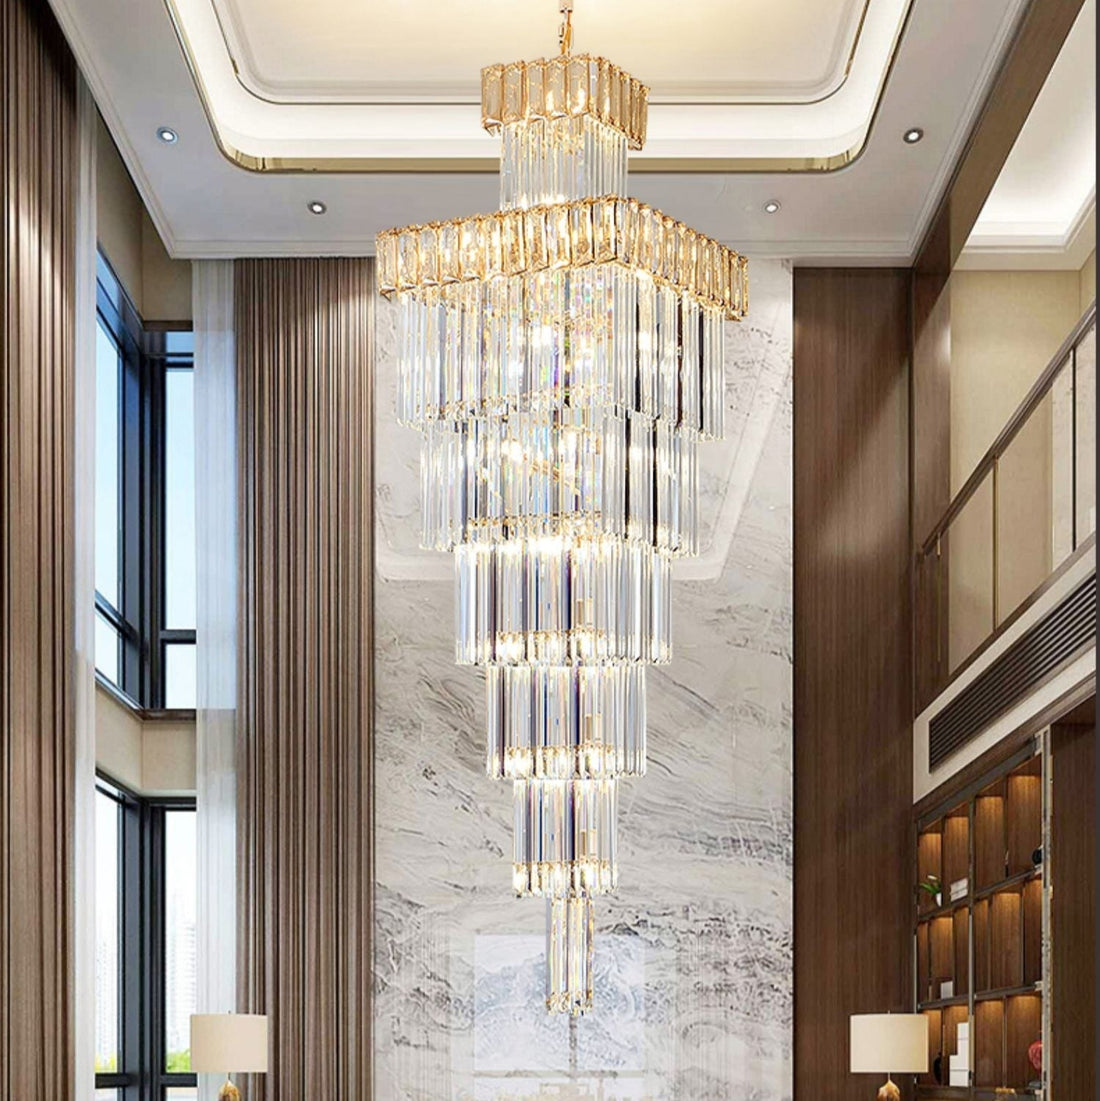 Decorative Oversized L39.4"*W39.4"*H157.5" Vertical Crystal Staircase Chandelier Foyer Ceiling Light Fixture Lamp In Gray/ Amber Brim